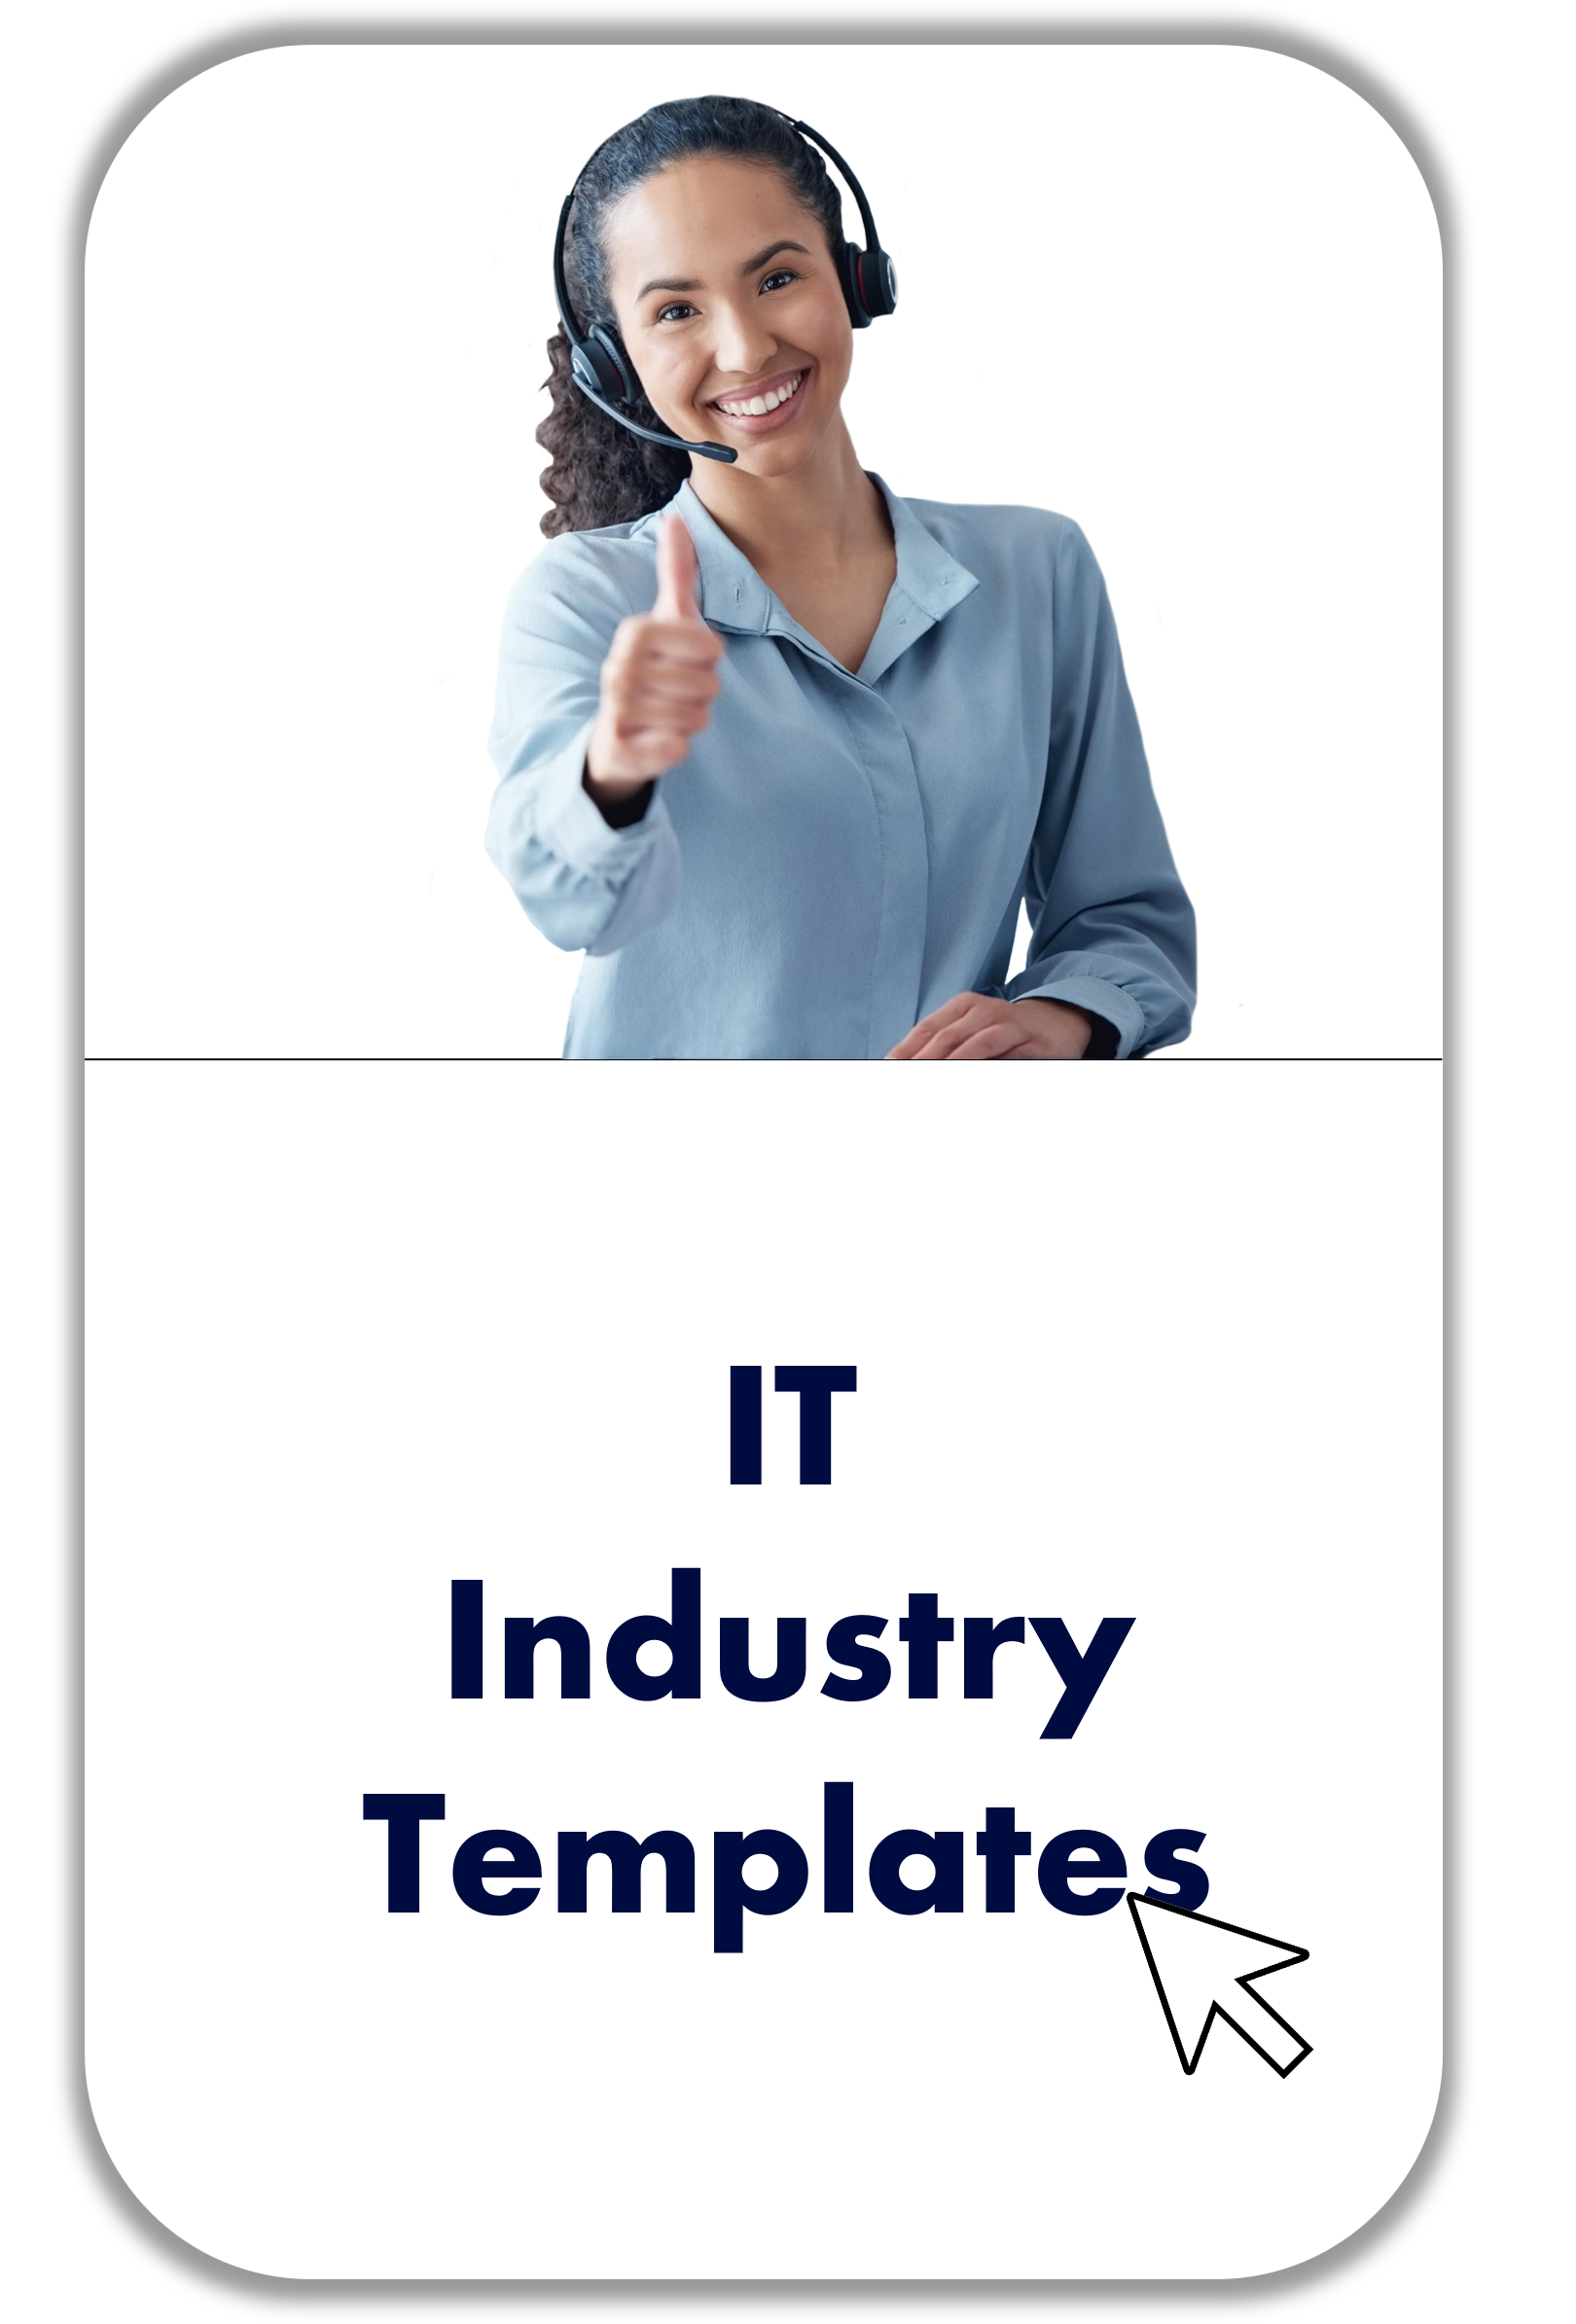 IT industry templates